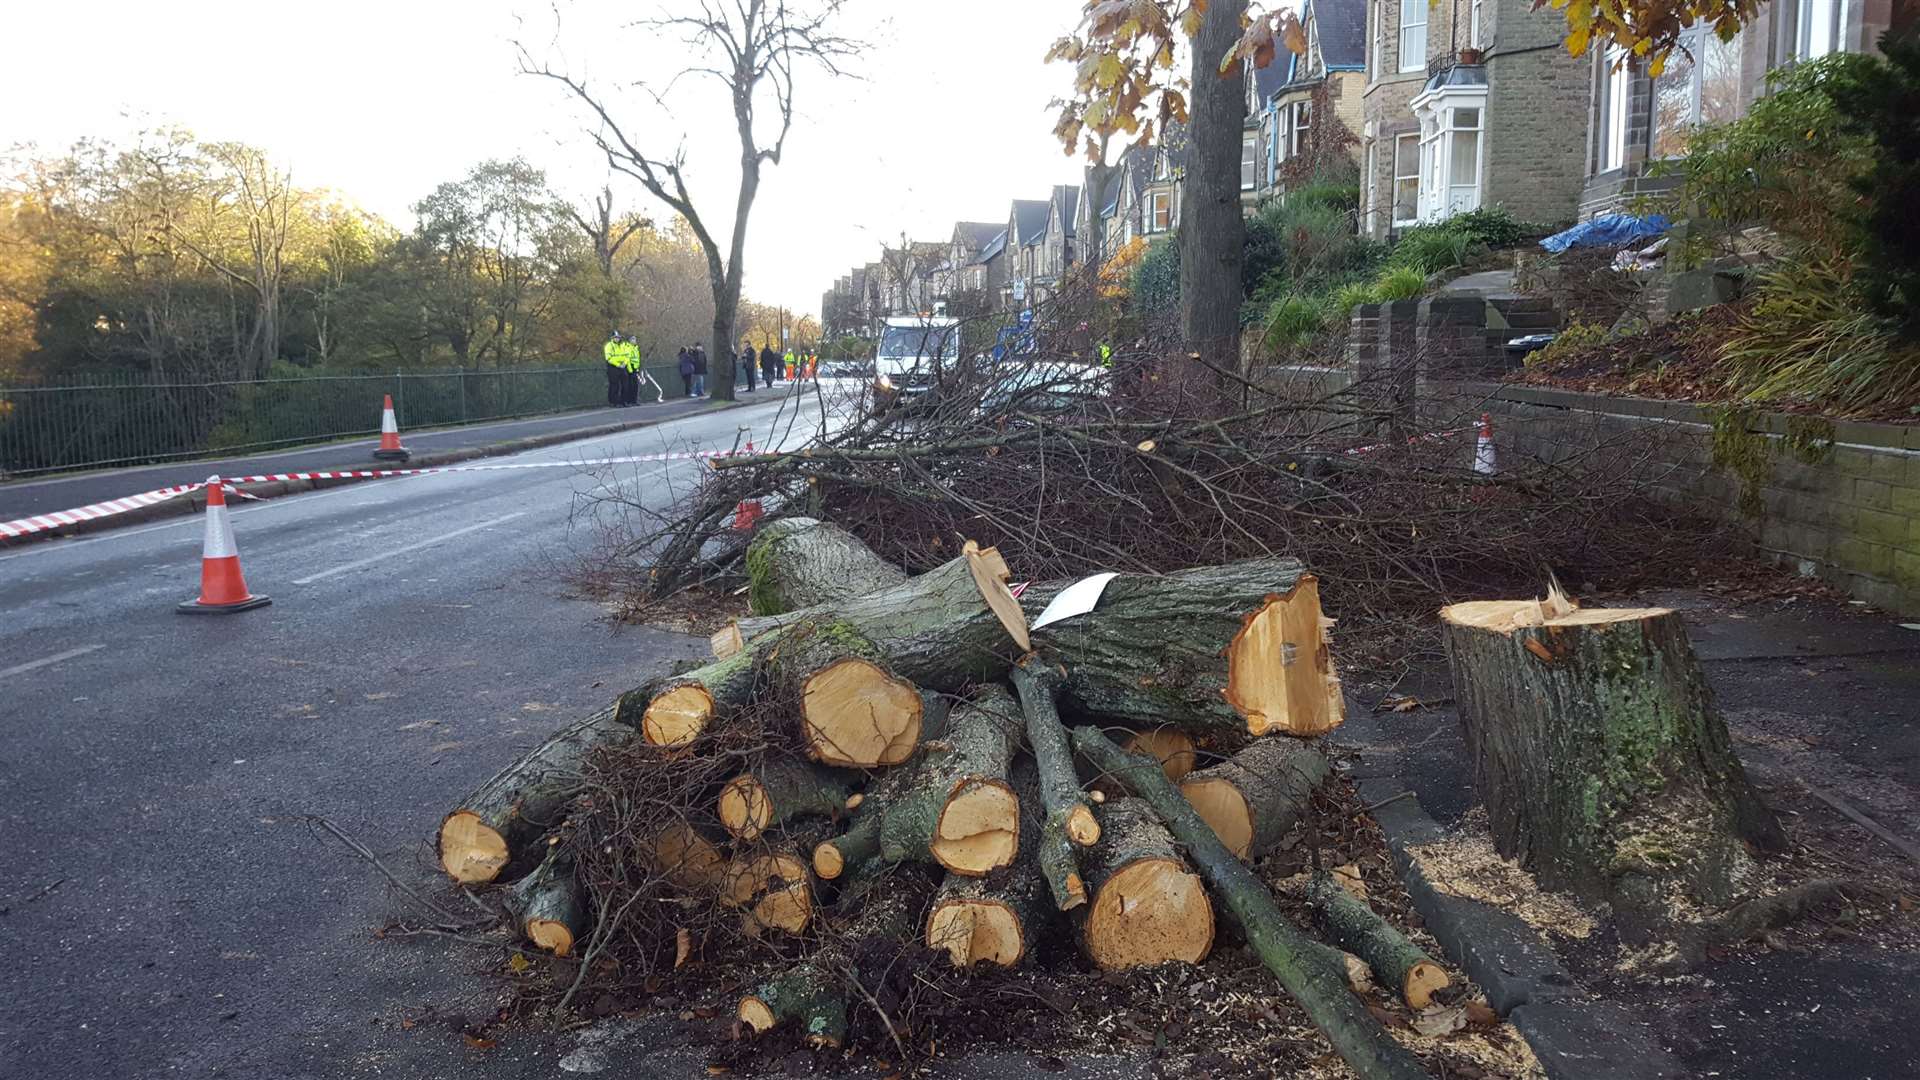 Tree trunks and branches lie on the ground in Rustlings Road, Sheffield, which was the scene of protests against tree felling (Dave Higgens/PA)